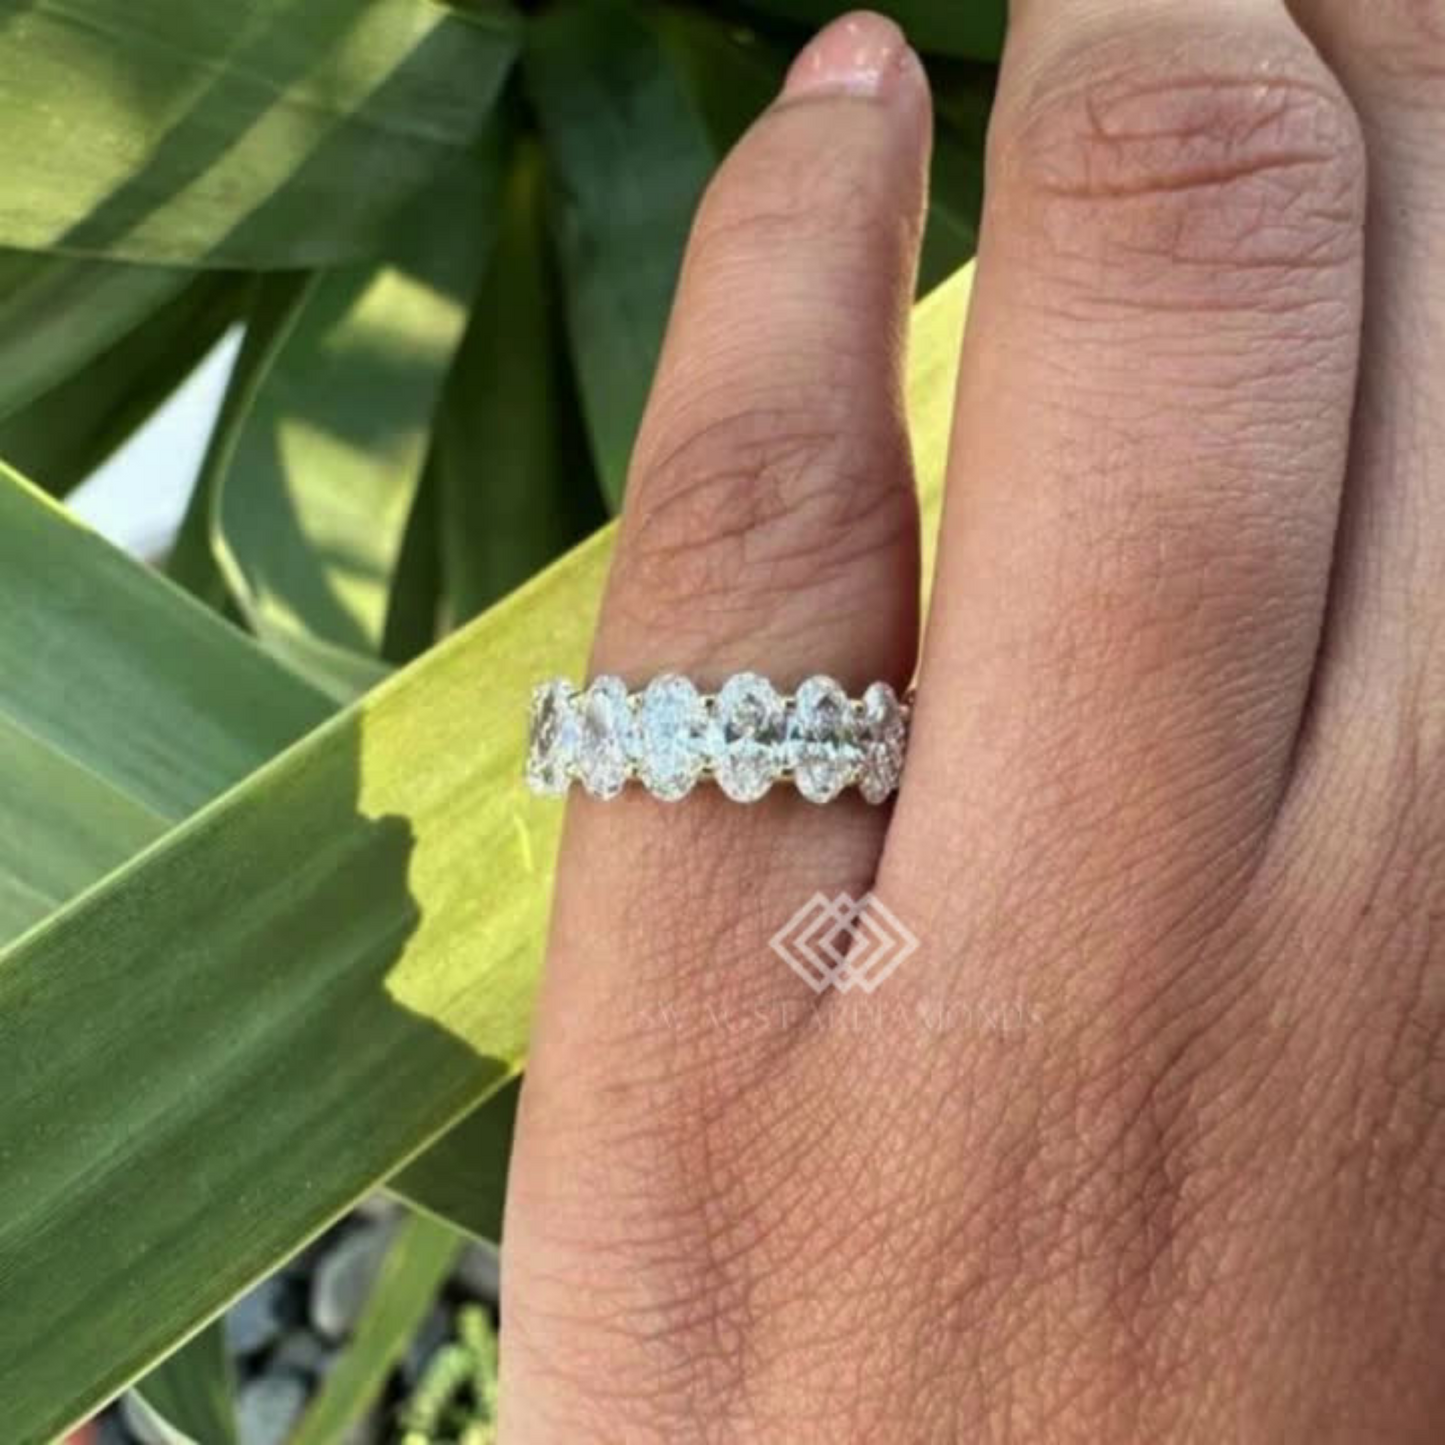 Oval Diamond Ring With Lab-Grown & Natural Diamonds, Jewelry By Leading Manufacturer From Swagstar, Surat. Explore Wedding, Engagement, Eternity Rings,  Earring & Studs, Bracelets In 10k, 14k, & 18k Gold Varieties, Including White, Yellow, Rose Gold.